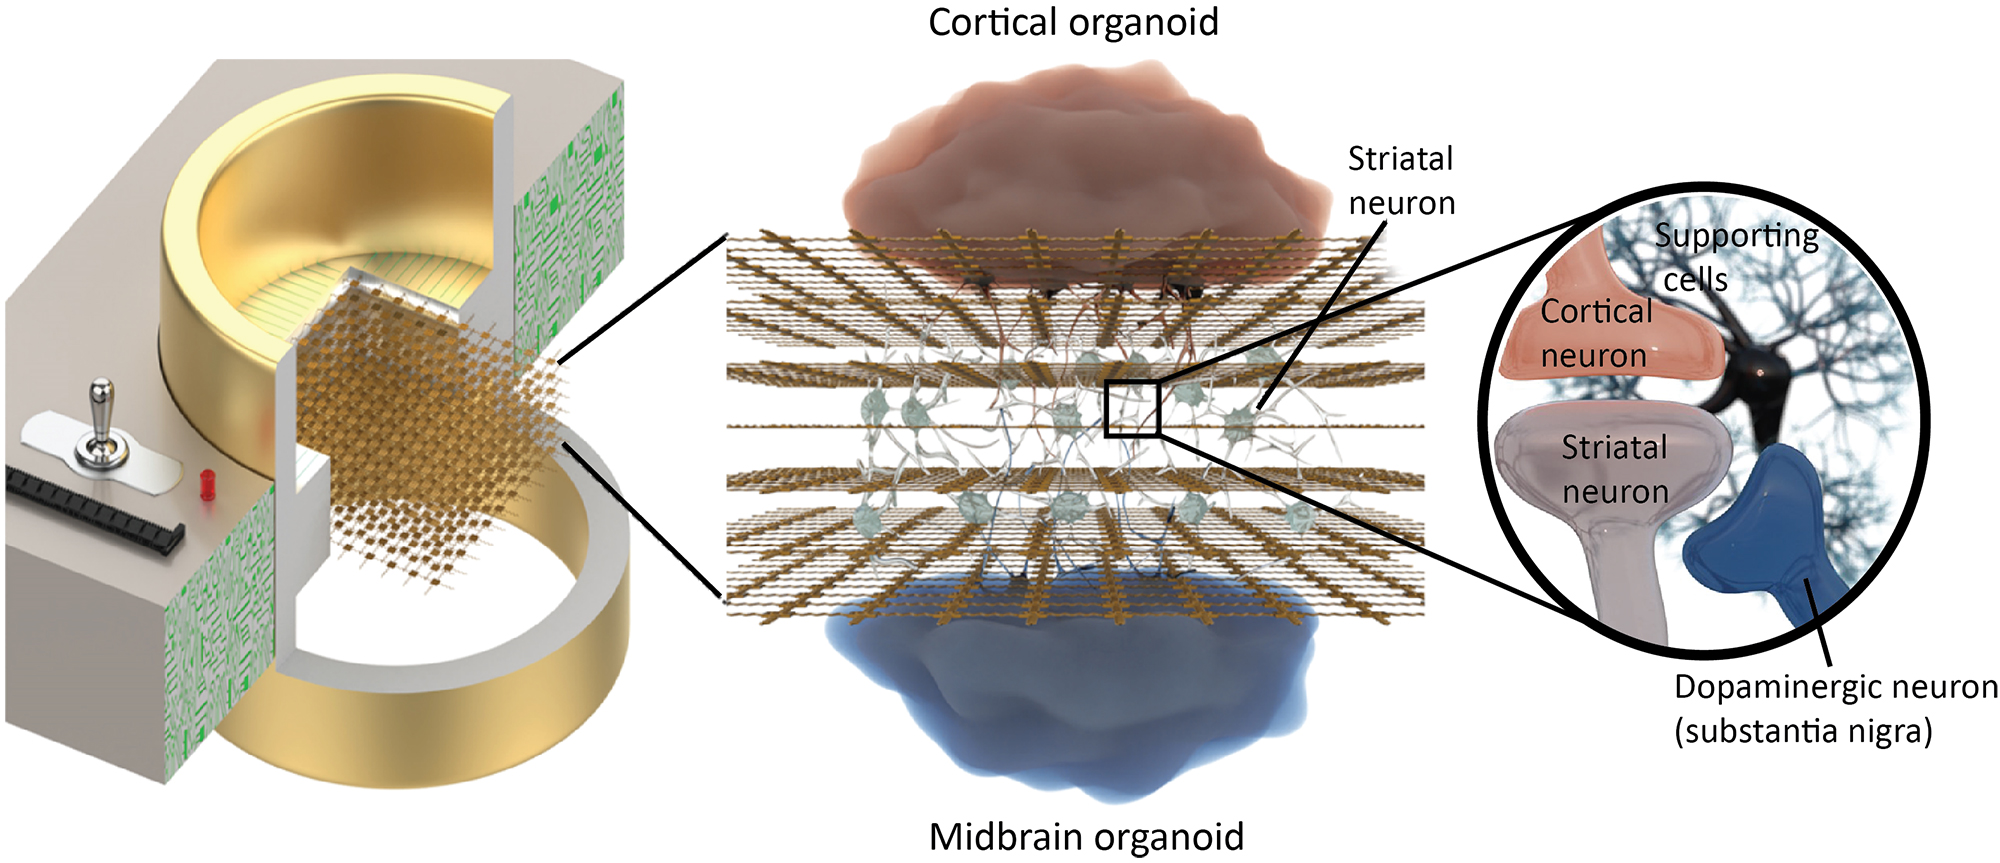 A future vision with 3D organoids on a 3D MEA